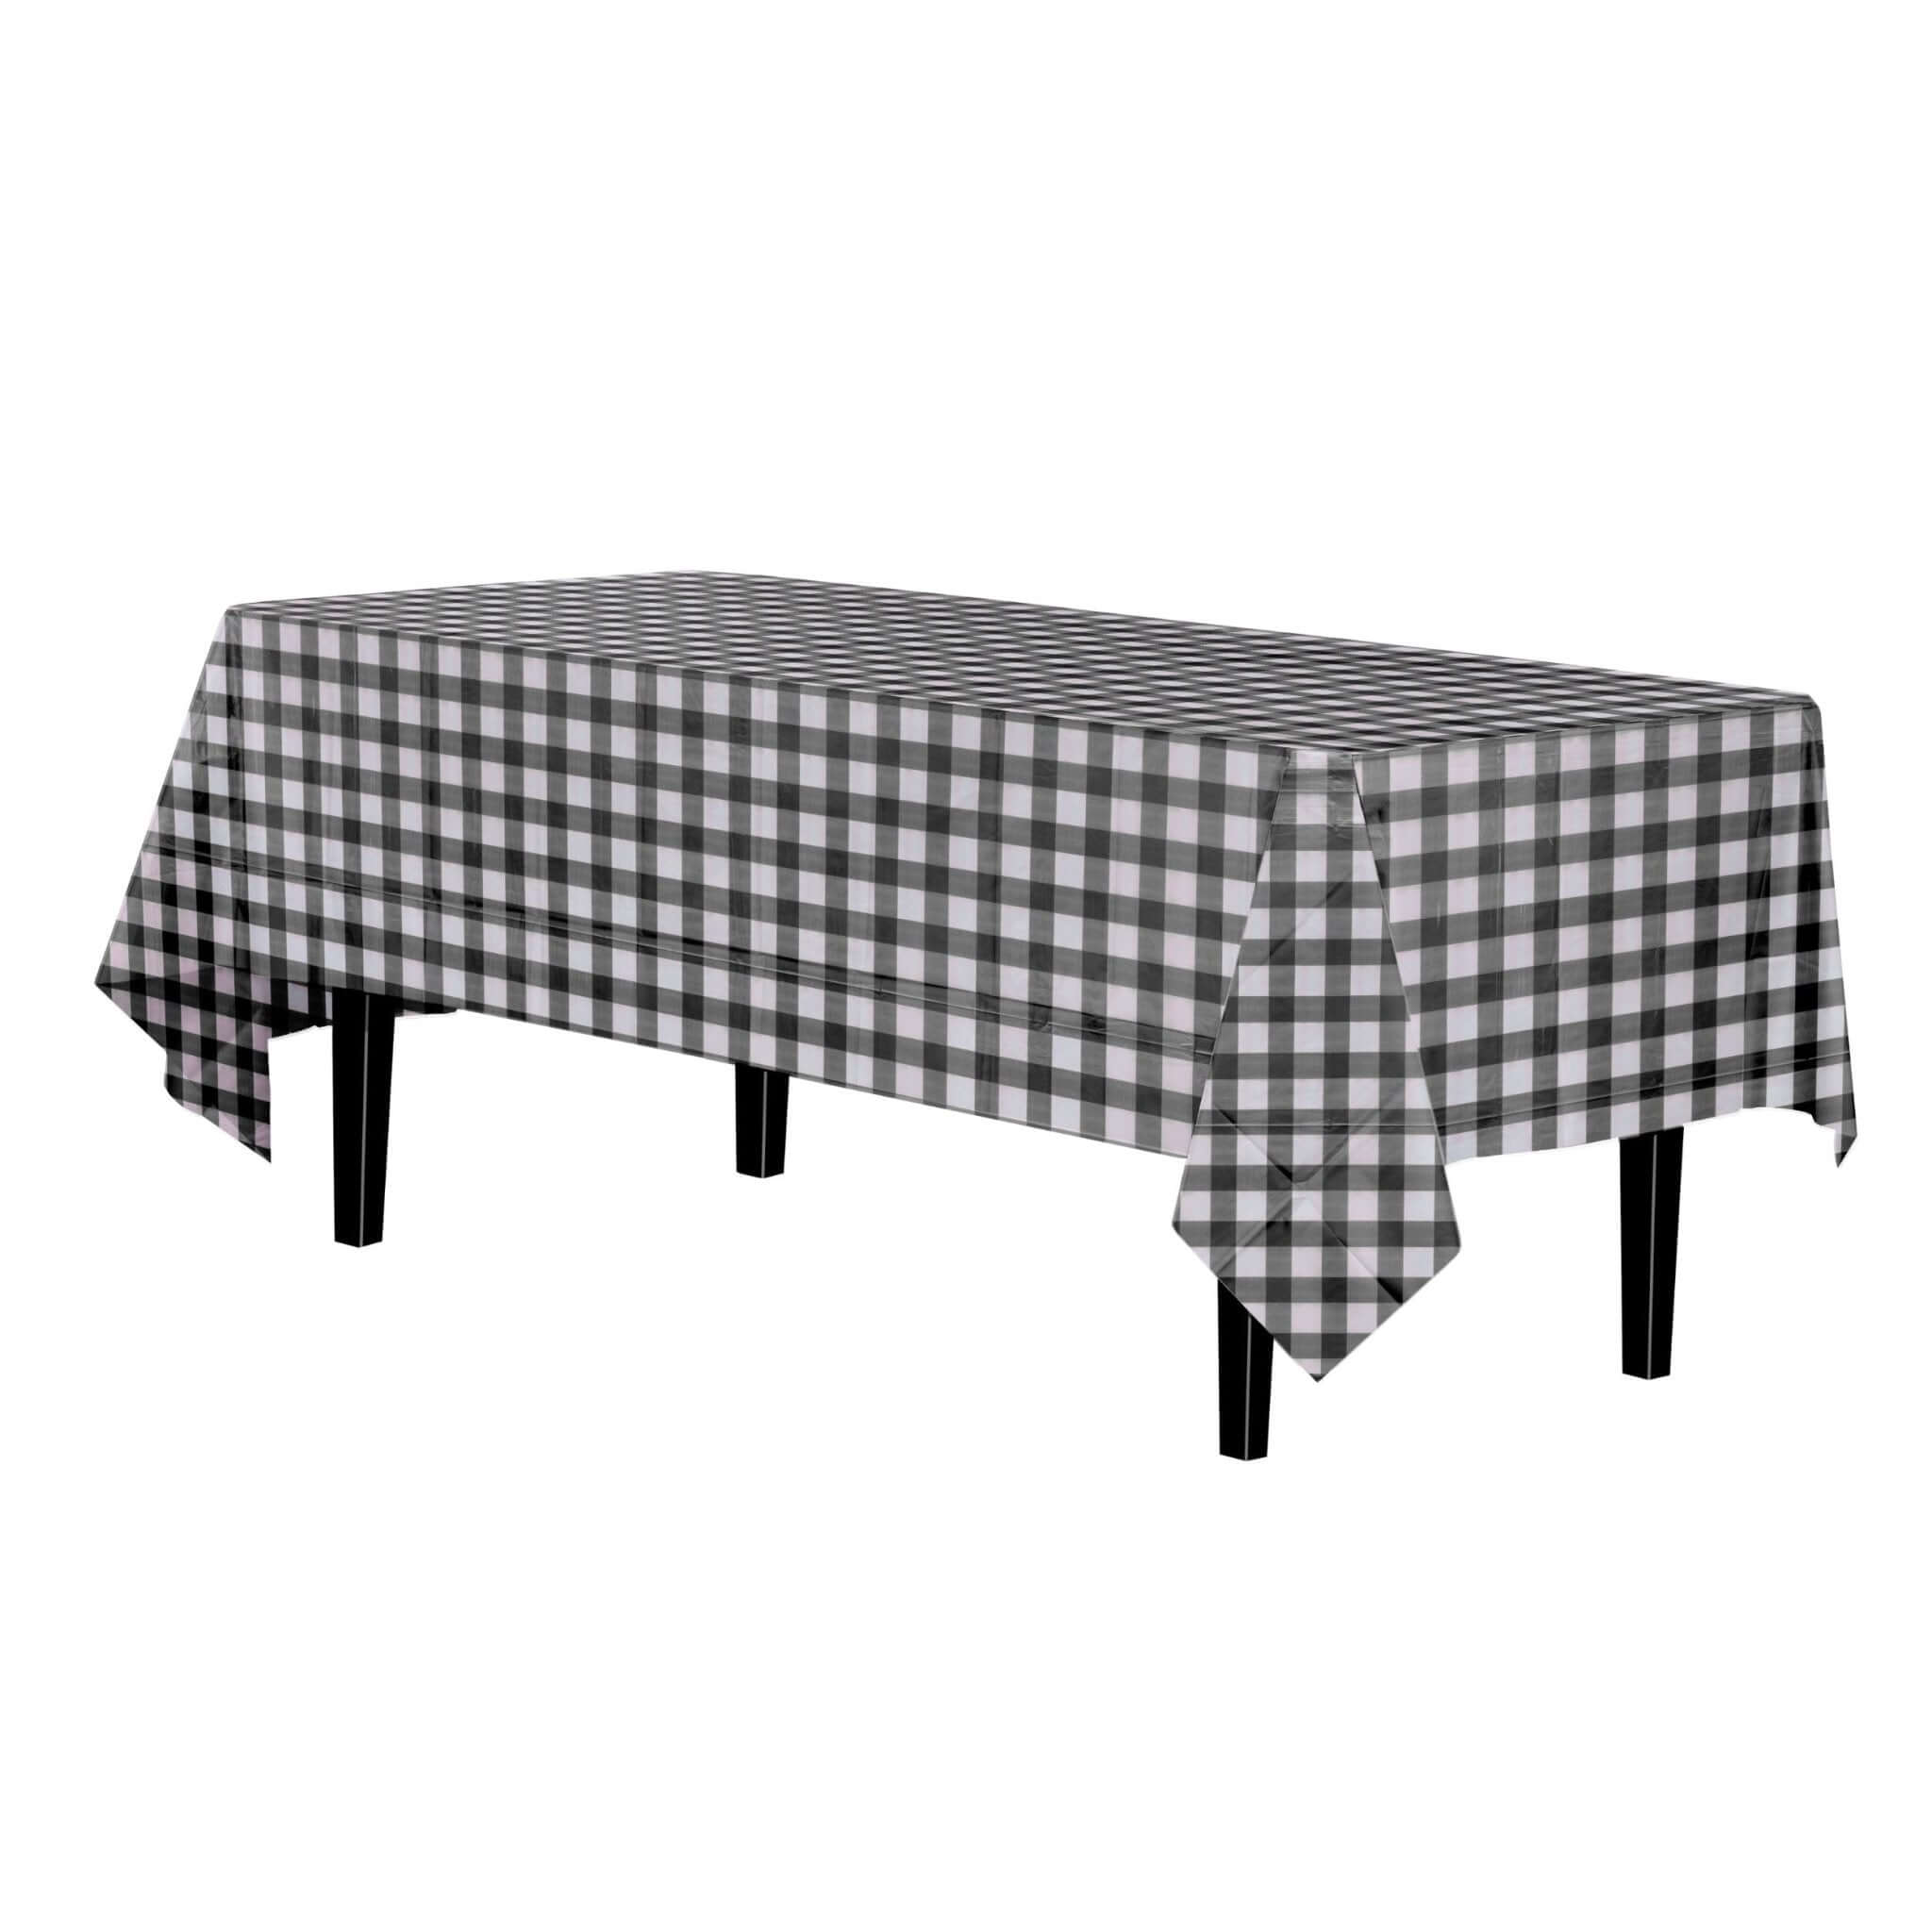 Black Gingham Printed Plastic Table Cloth | 48 Count